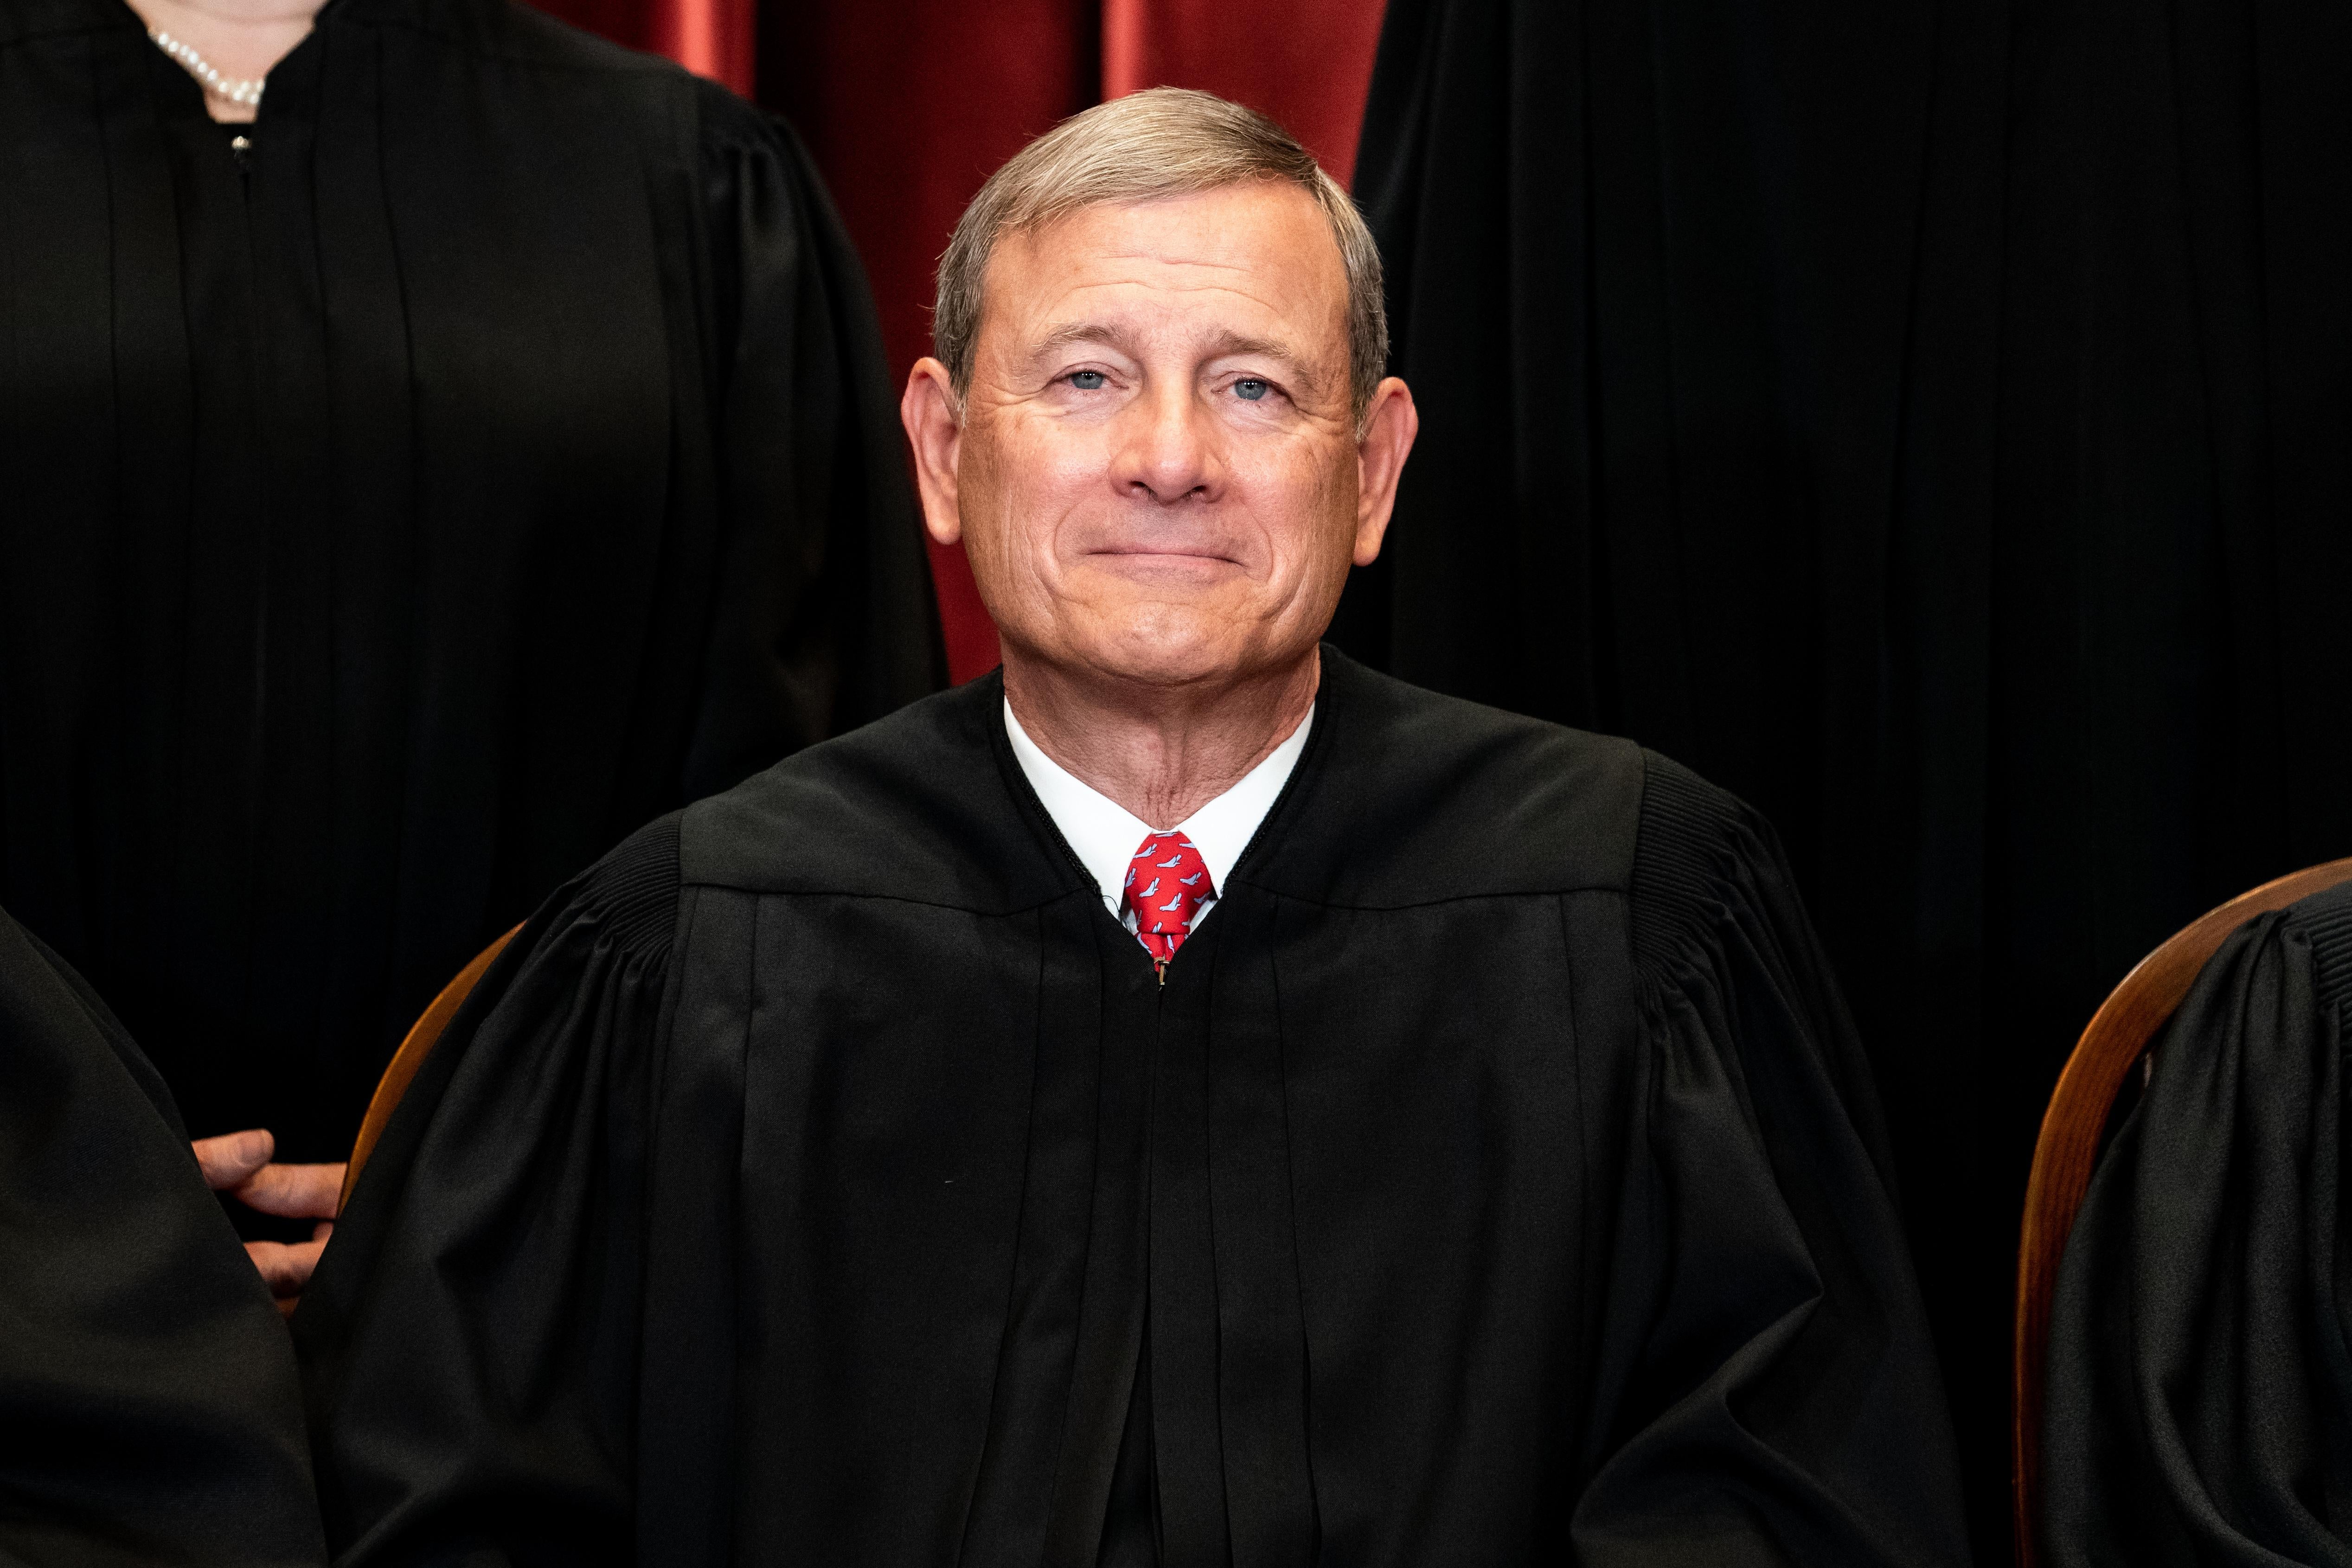 John Roberts in robes for a group photo with the justices.